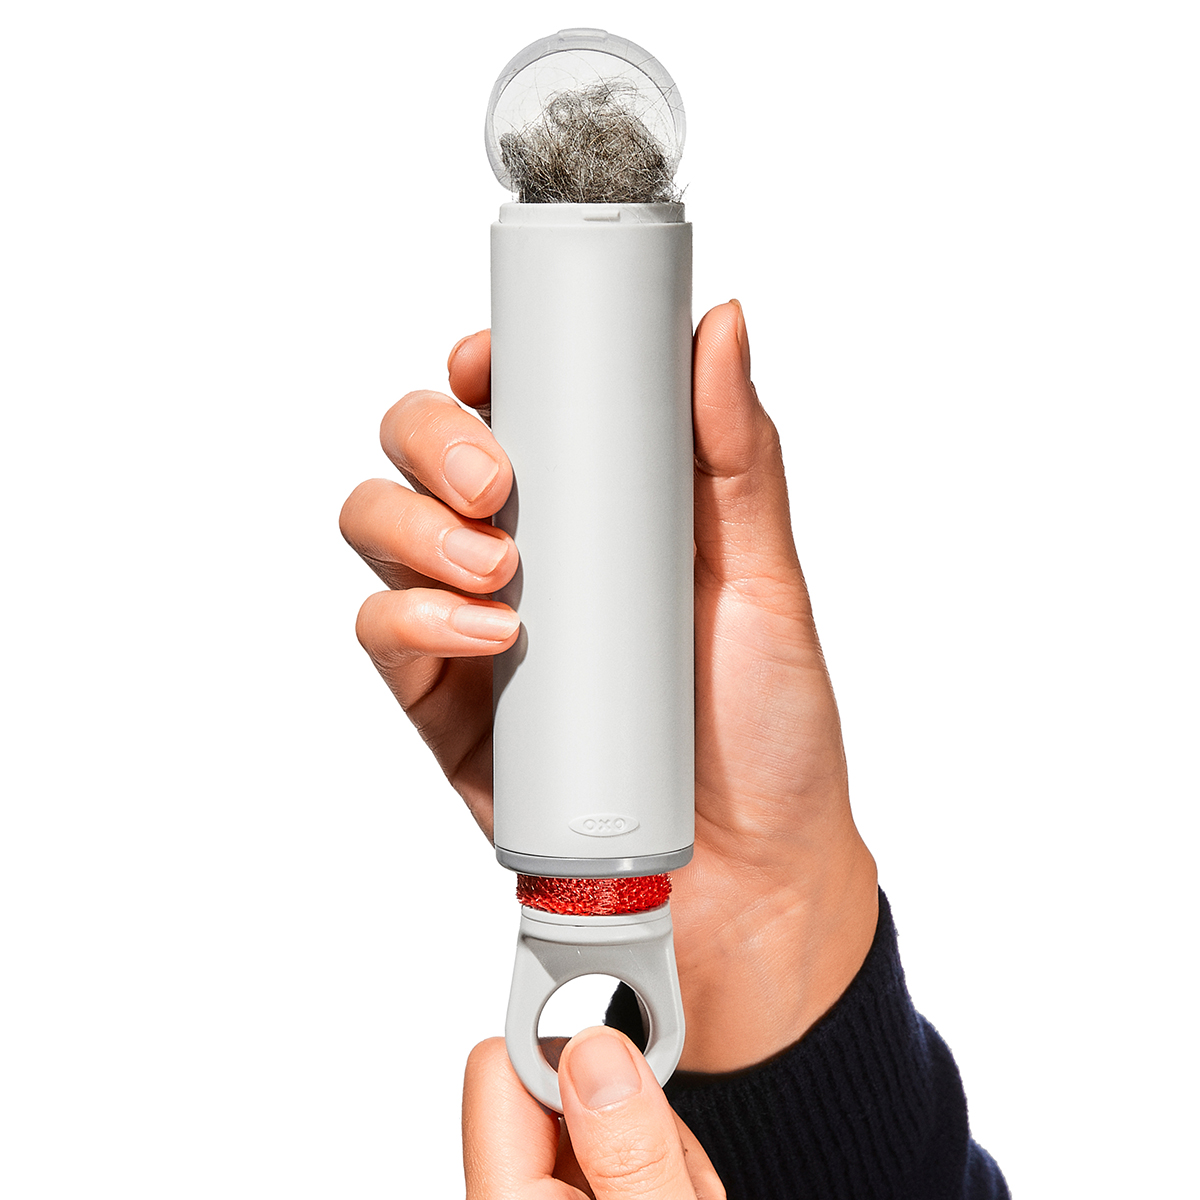 https://www.containerstore.com/catalogimages/477165/10092415-oxo-reusable-lint-roller-ve.jpg